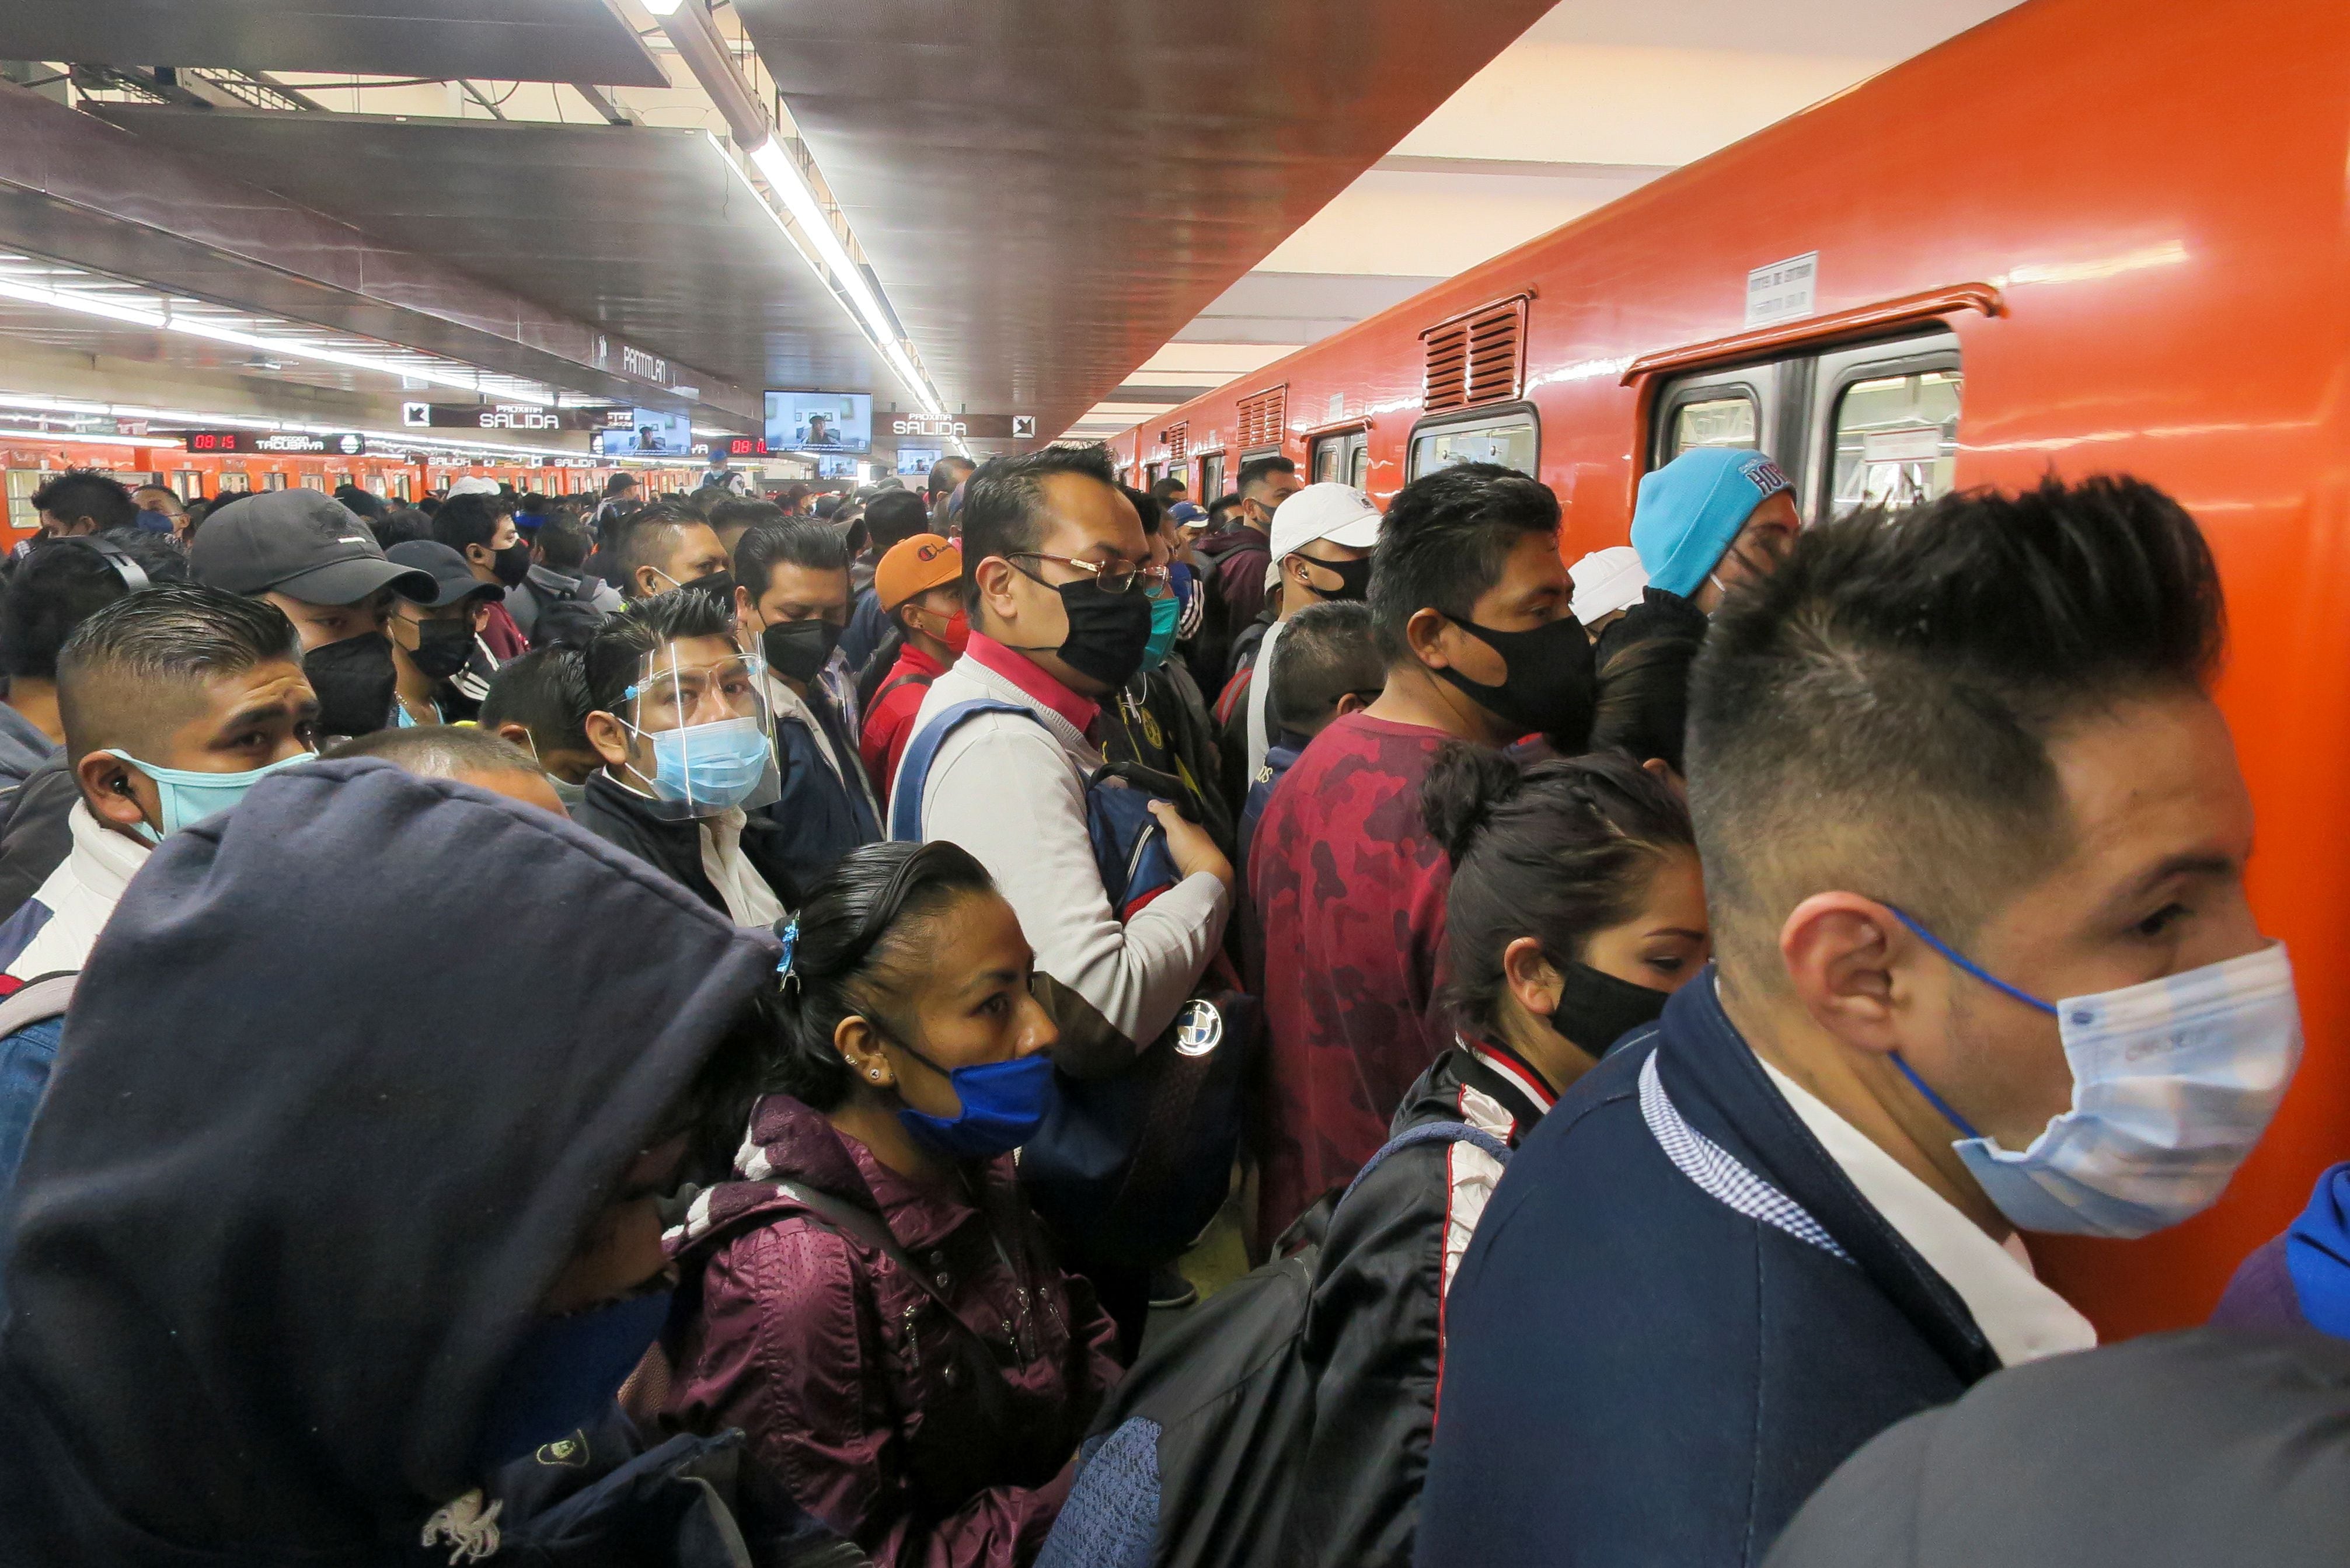 People wait at a platform to enter a metro carriage at the Pantitlan metro station in Mexico City, Mexico May 5, 2021. REUTERS/Luis Cortes